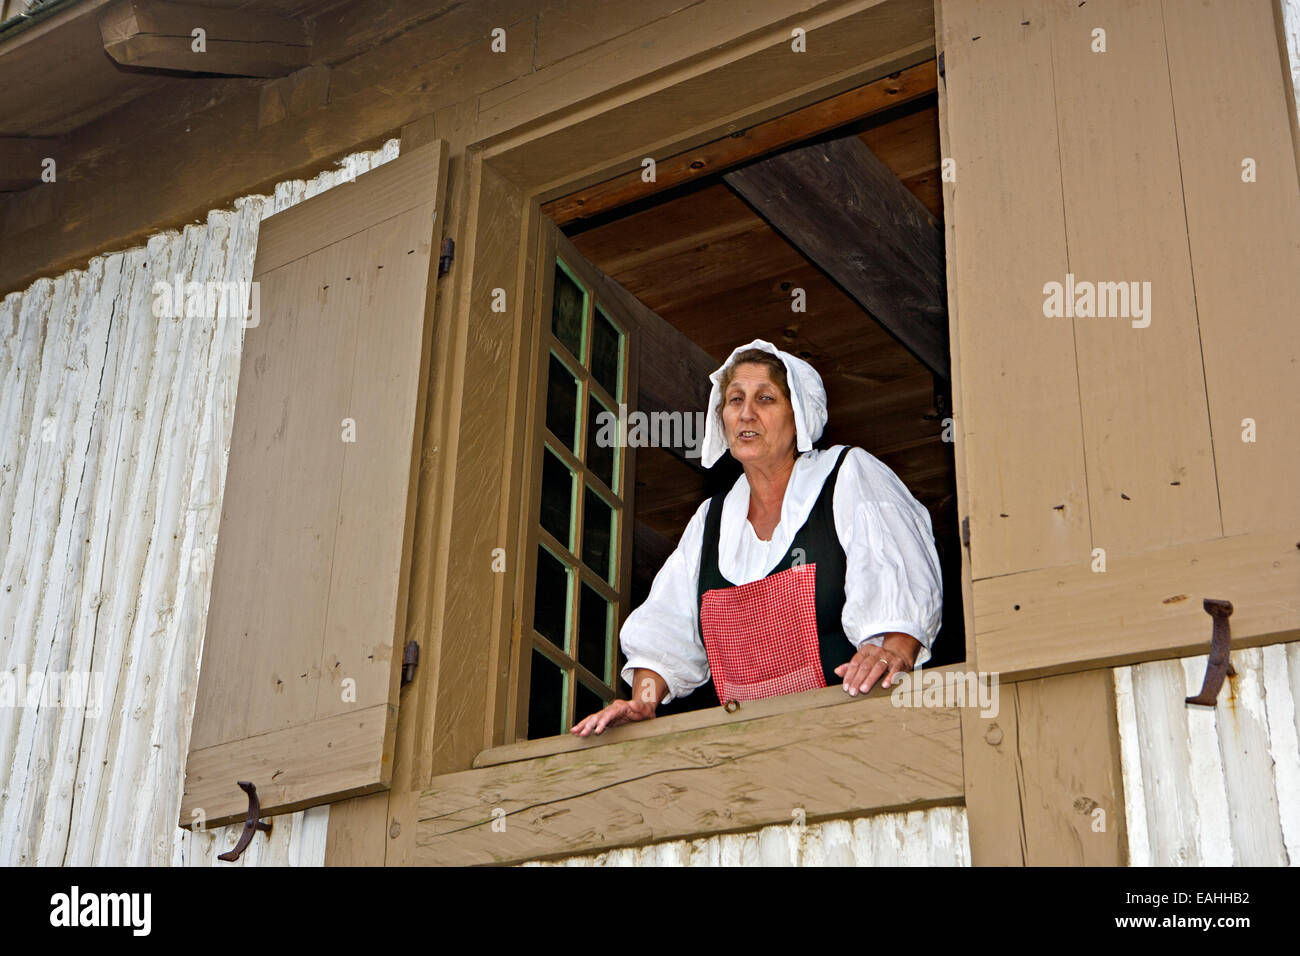 A woman banters during a public punishment of a fisherman for stealing a bottle of wine at the Fortress of Louisbourg, Louisbour Stock Photo